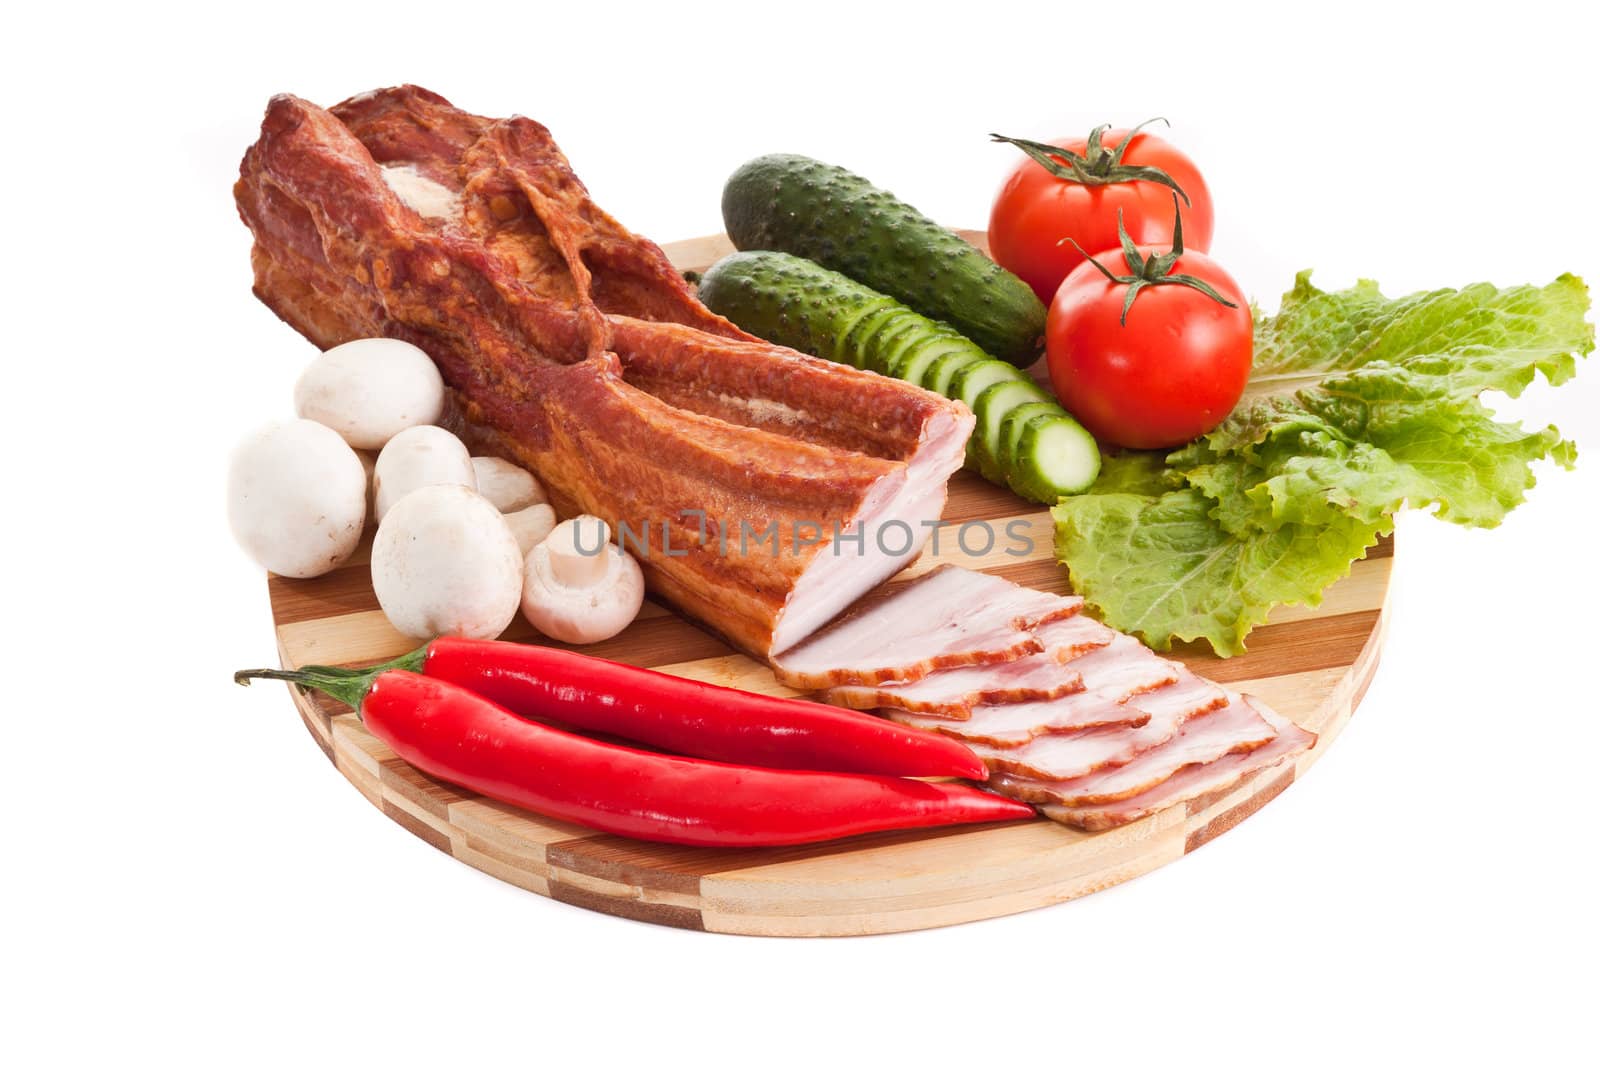 sausage on plate with vegetables isolated on white